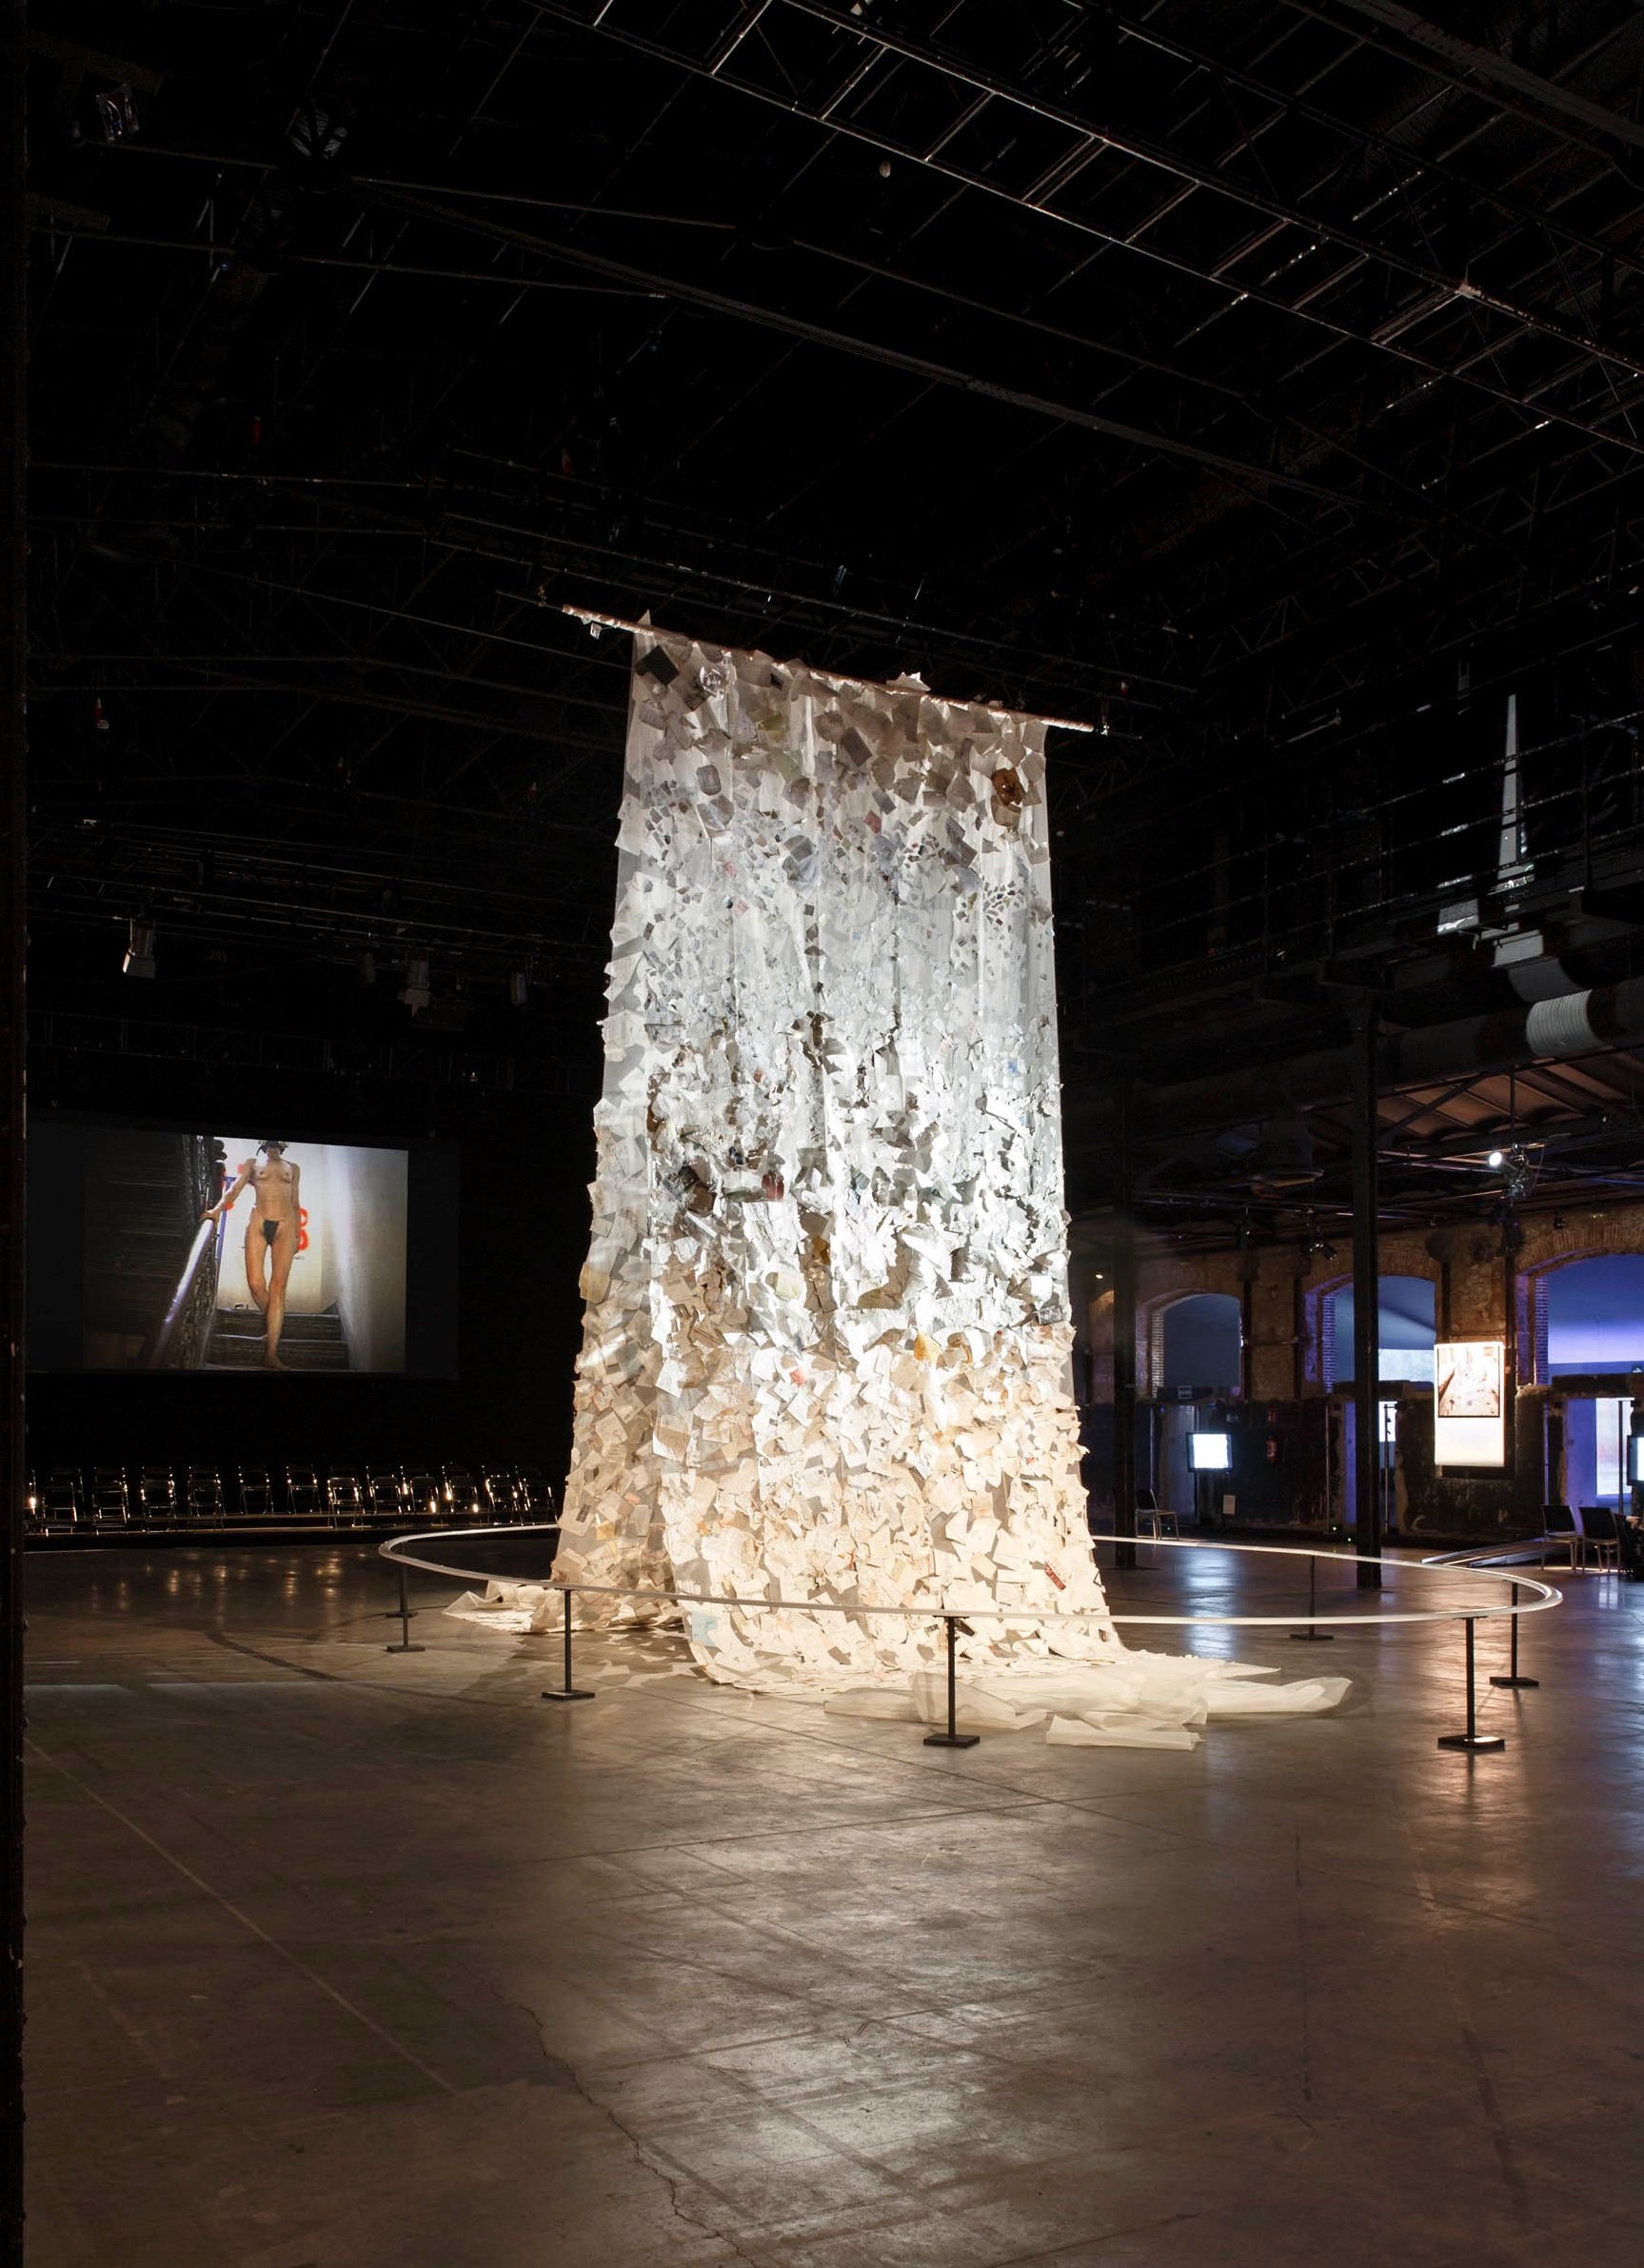   CHANT  and video  Nude Descending a staircase, installation views  at Naves Matadero, Madrid, curated by Mateo Feijoo, 2019 